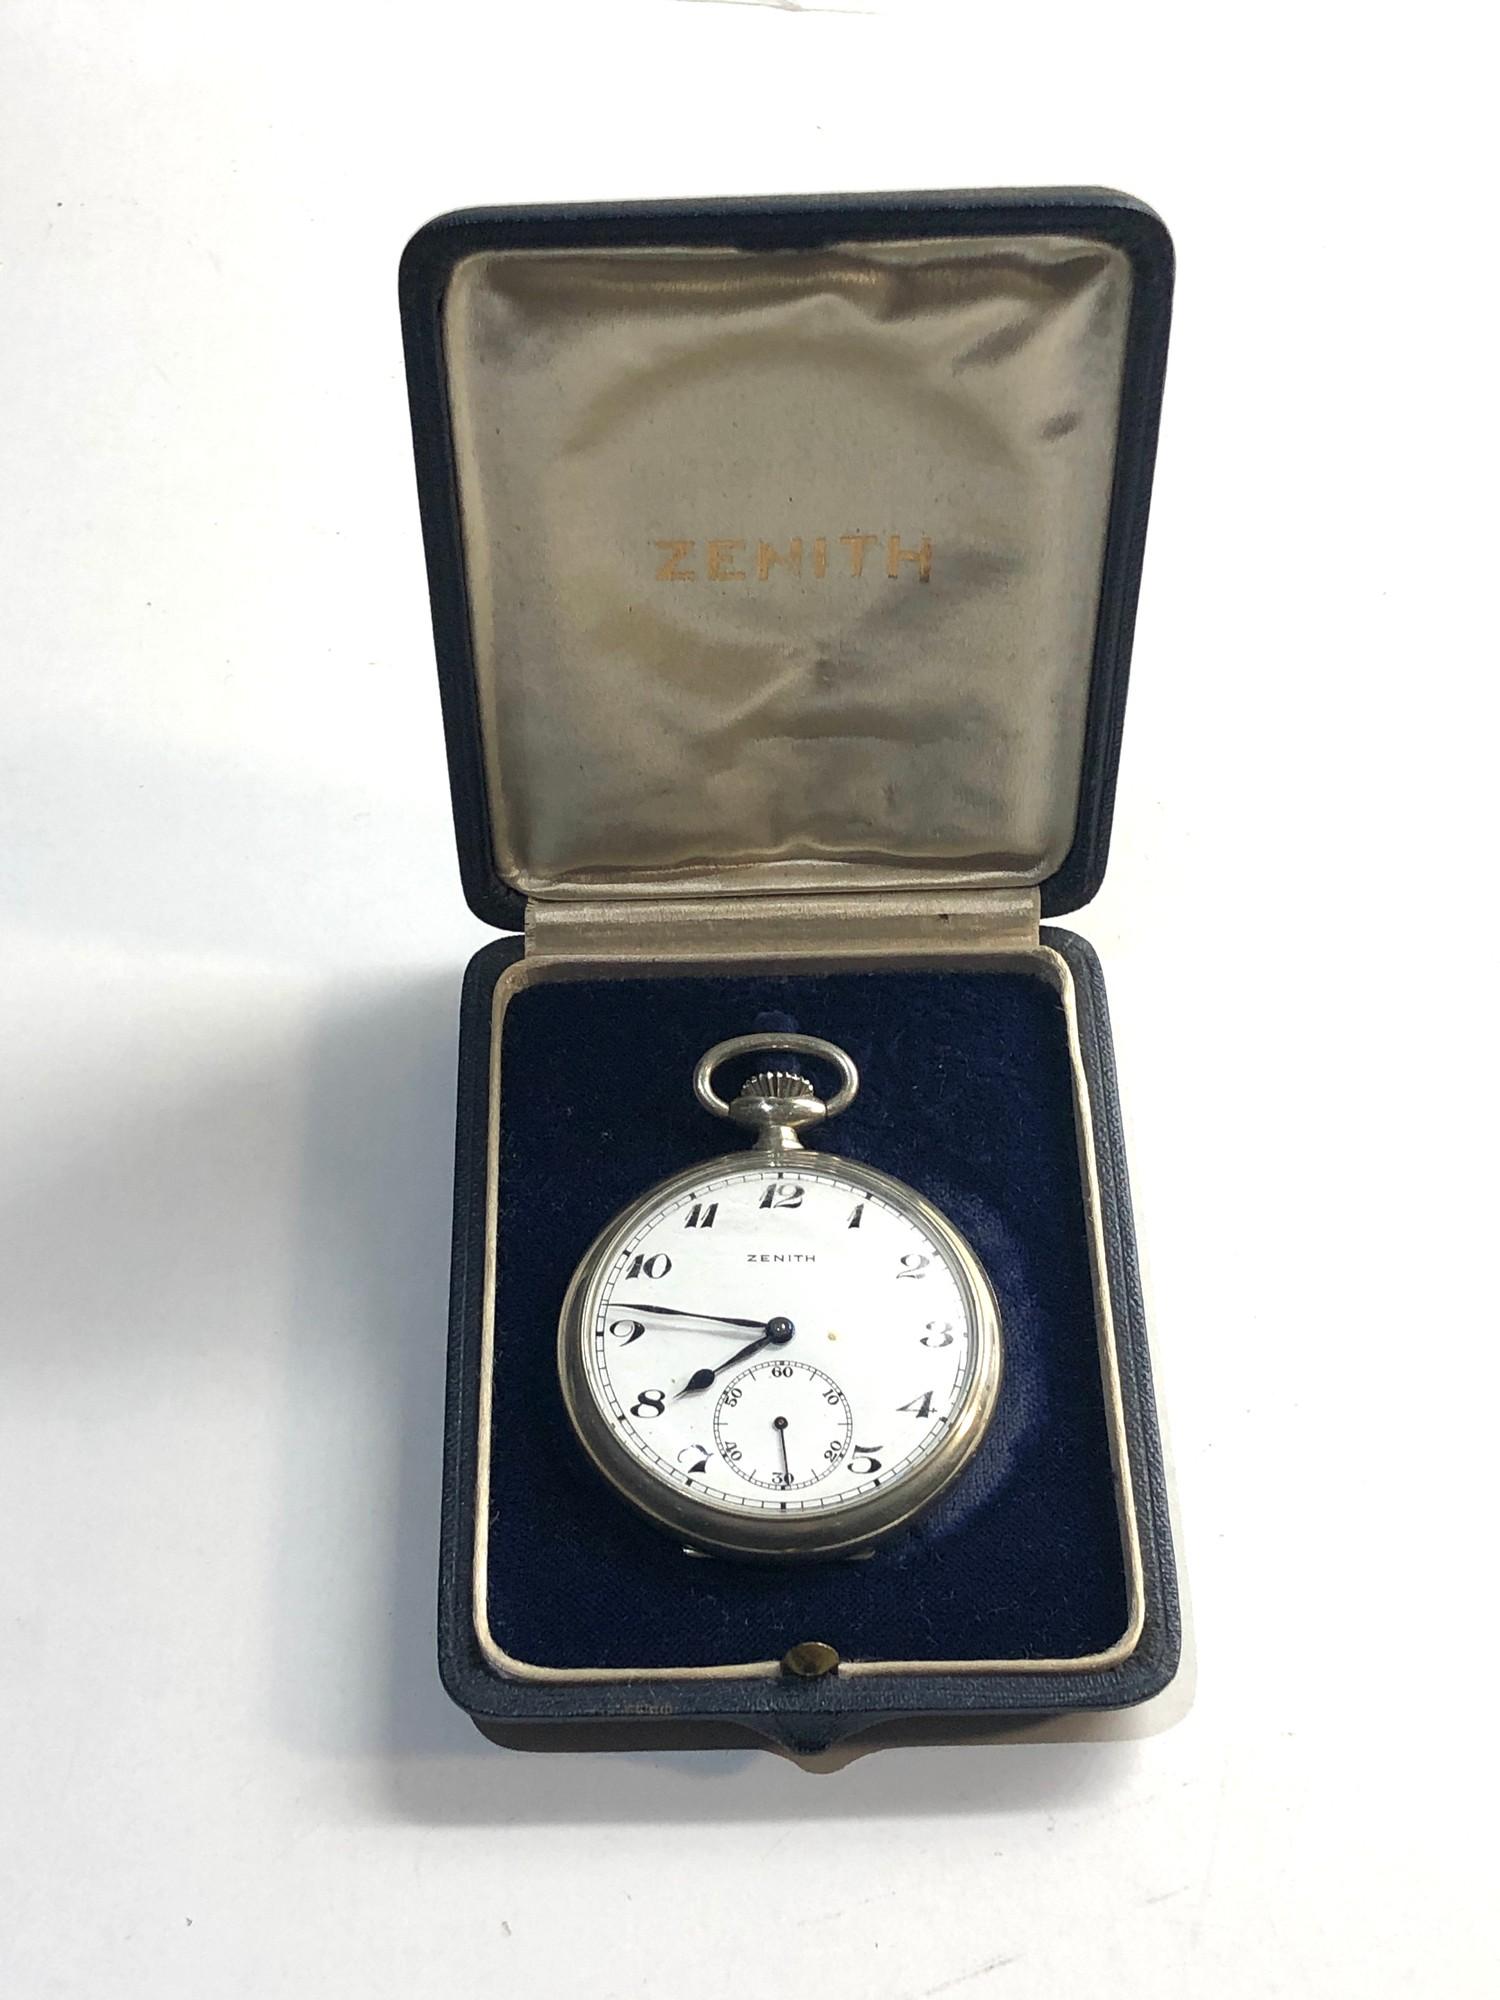 original boxed Zenith pocket watch winds and ticks but no warranty given